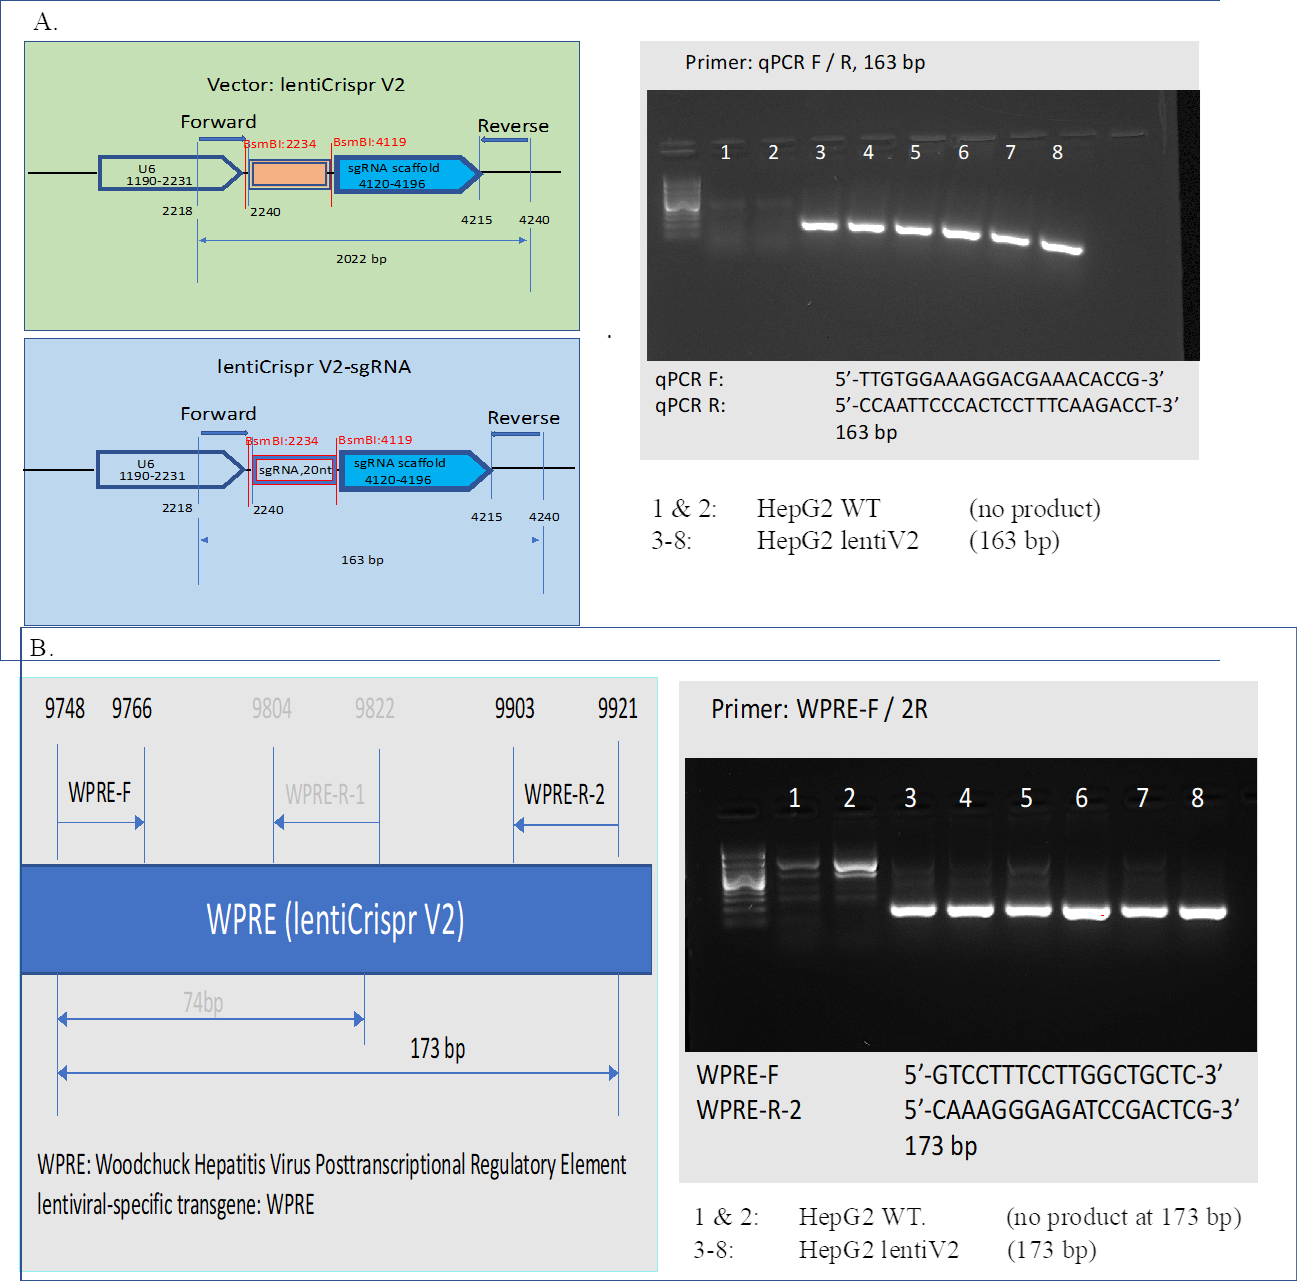 Figure S10: Verification of sgRNA cassette and lentiV2 transgene. A. 20nt sgRNA cassette was verified in lentiV2 transduced genomic DNA population, 163 bp PCR product obtained, while WT HepG2 didn’t possess the cassette, thus, no PCR product. B. lentiviral-specific transgene WPRE was verified in lentiV2 transduced genomic DNA population, while no transduced WT didn’t have the transgene, therefore, no 173 bp PCR product observed. For both panels A and B, 100 bp ladder was used in Lane 0. The CRISPR screening process was performed once, but we conducted two selections (high and low fluorescence) with a control of no/before selection. Subsequently, we generated three technical replicates for the DNA-seq libraries under each condition. In order to mitigate false positives resulting from the single-screen process, we overlapped the candidates from multiple pairwise differential analyses and selected the genes that were consistent between selections.